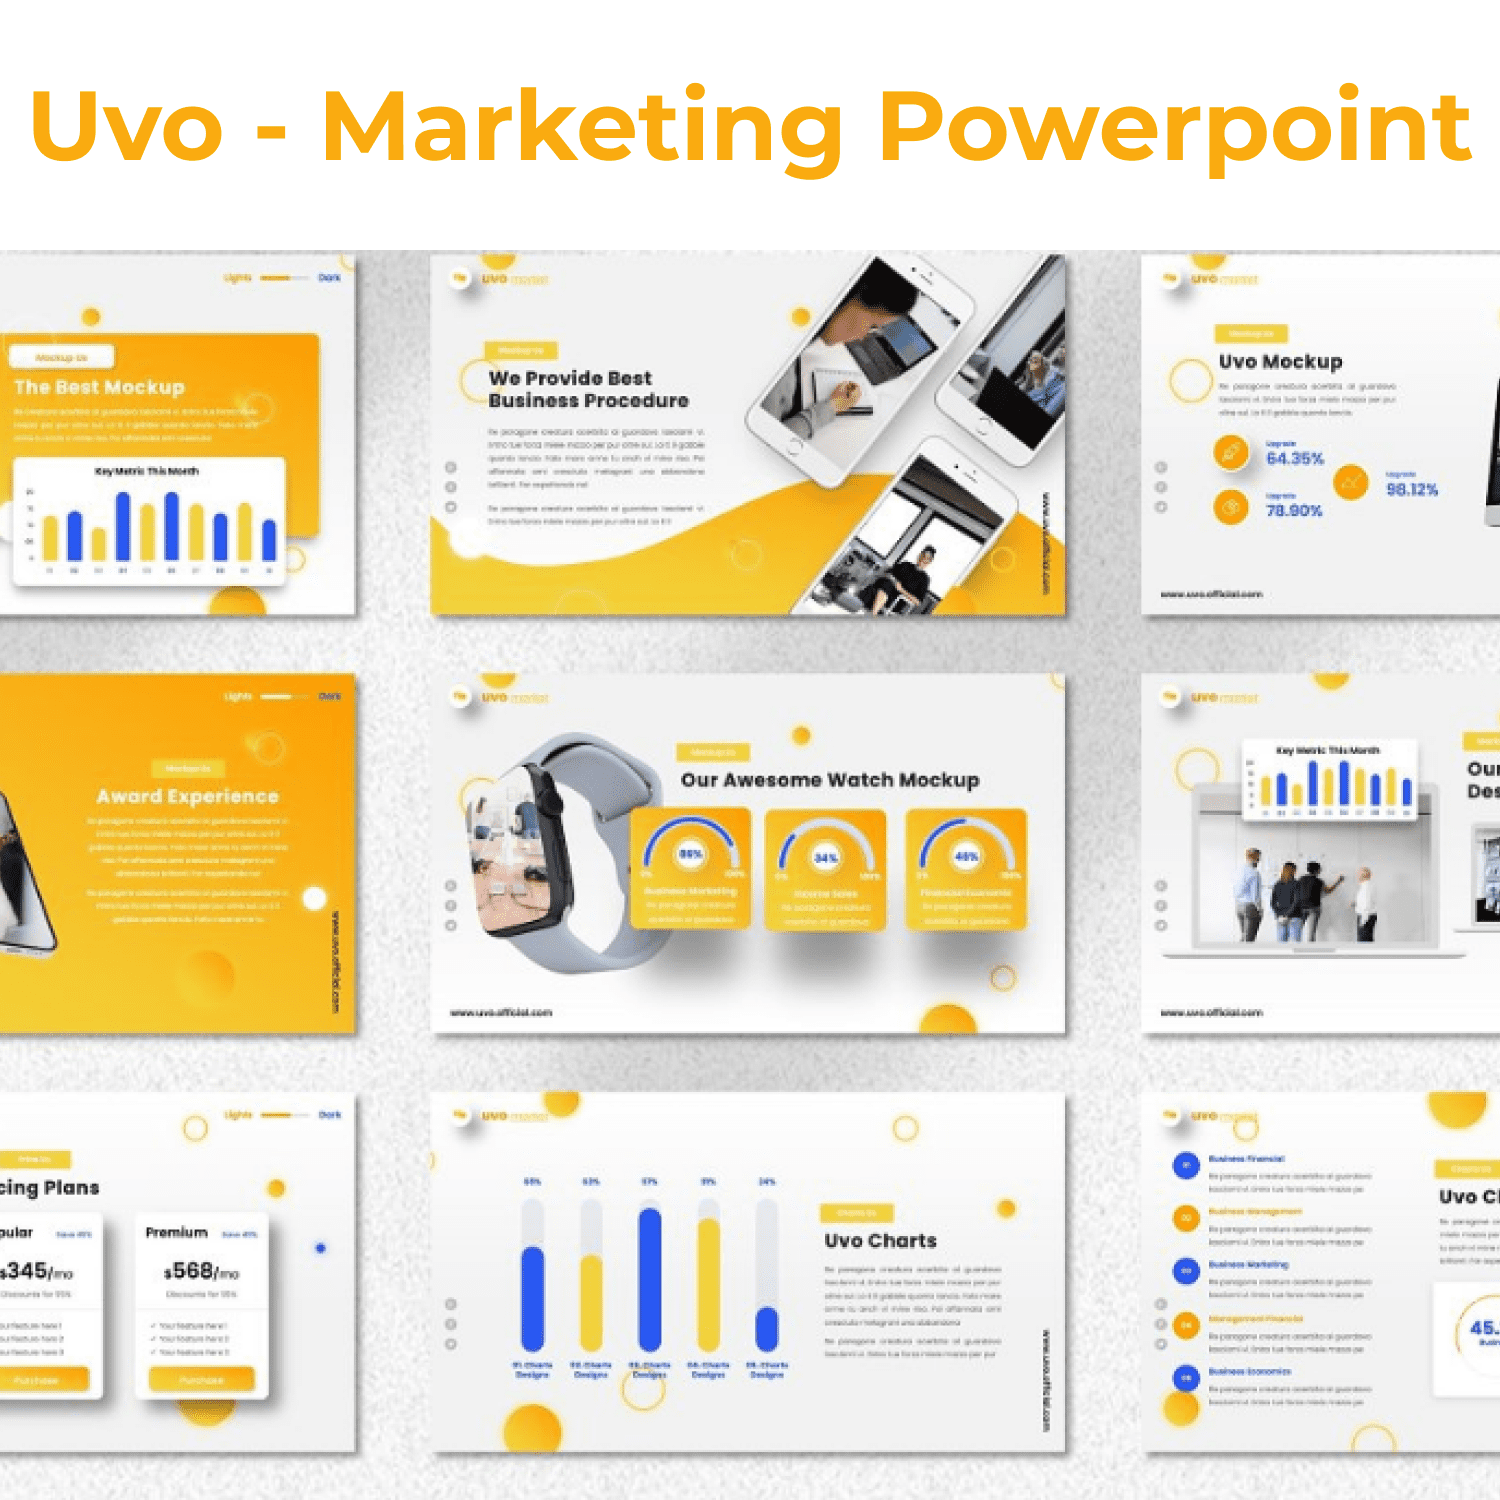 Uvo - Marketing Powerpoint cover image.